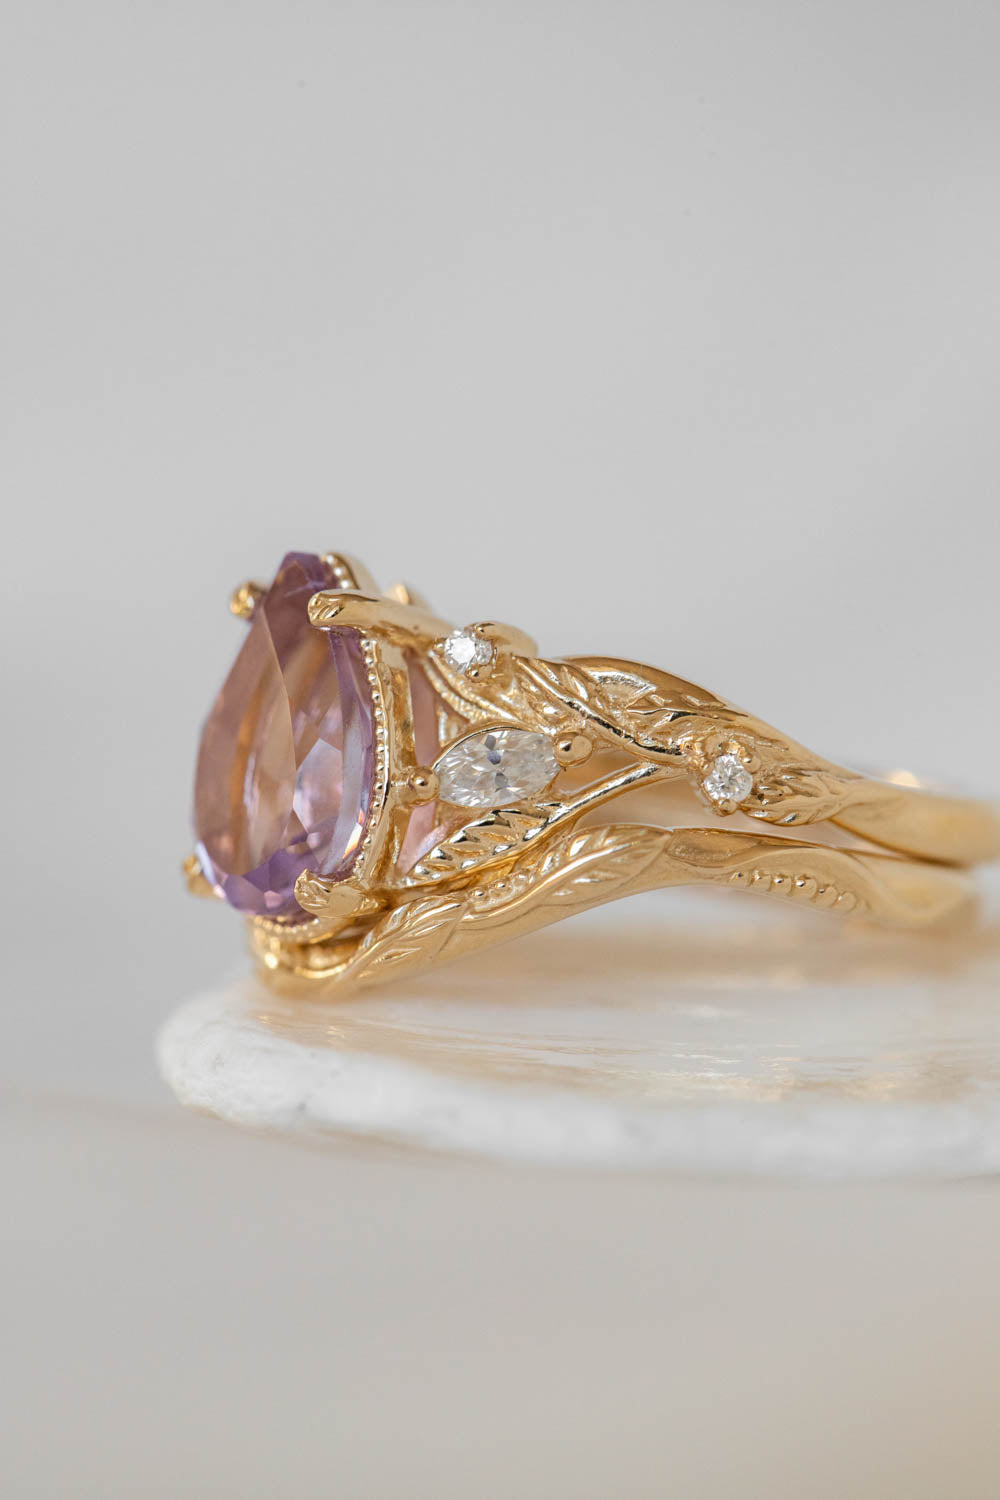 Lavender amethyst nature themed engagement ring, big pear cut gemstone gold ring with diamonds / Patricia - Eden Garden Jewelry™